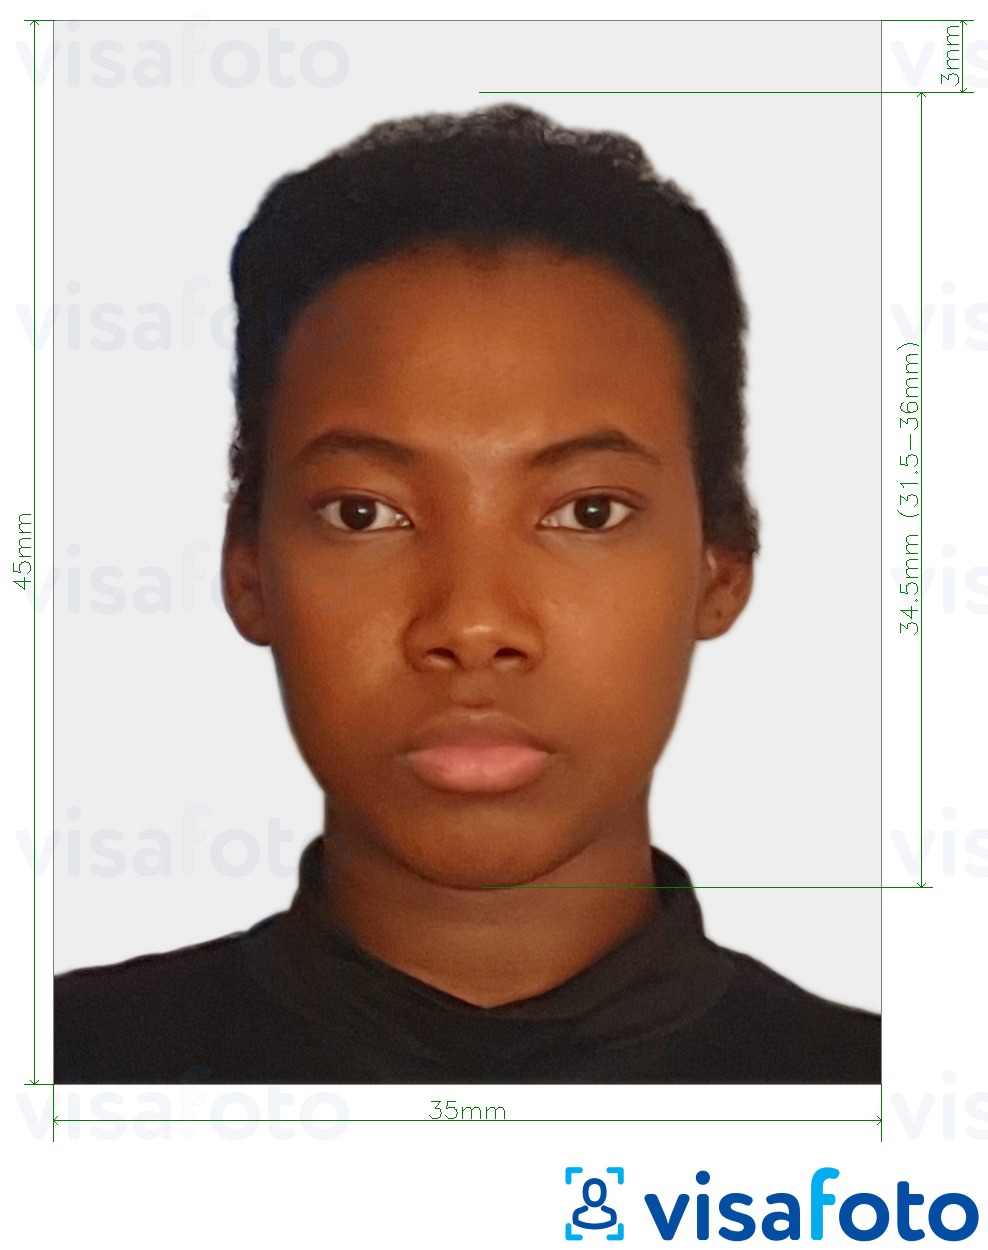 Example of photo for Suriname visa 45x35 mm (1.77x1.37 inch) with exact size specification